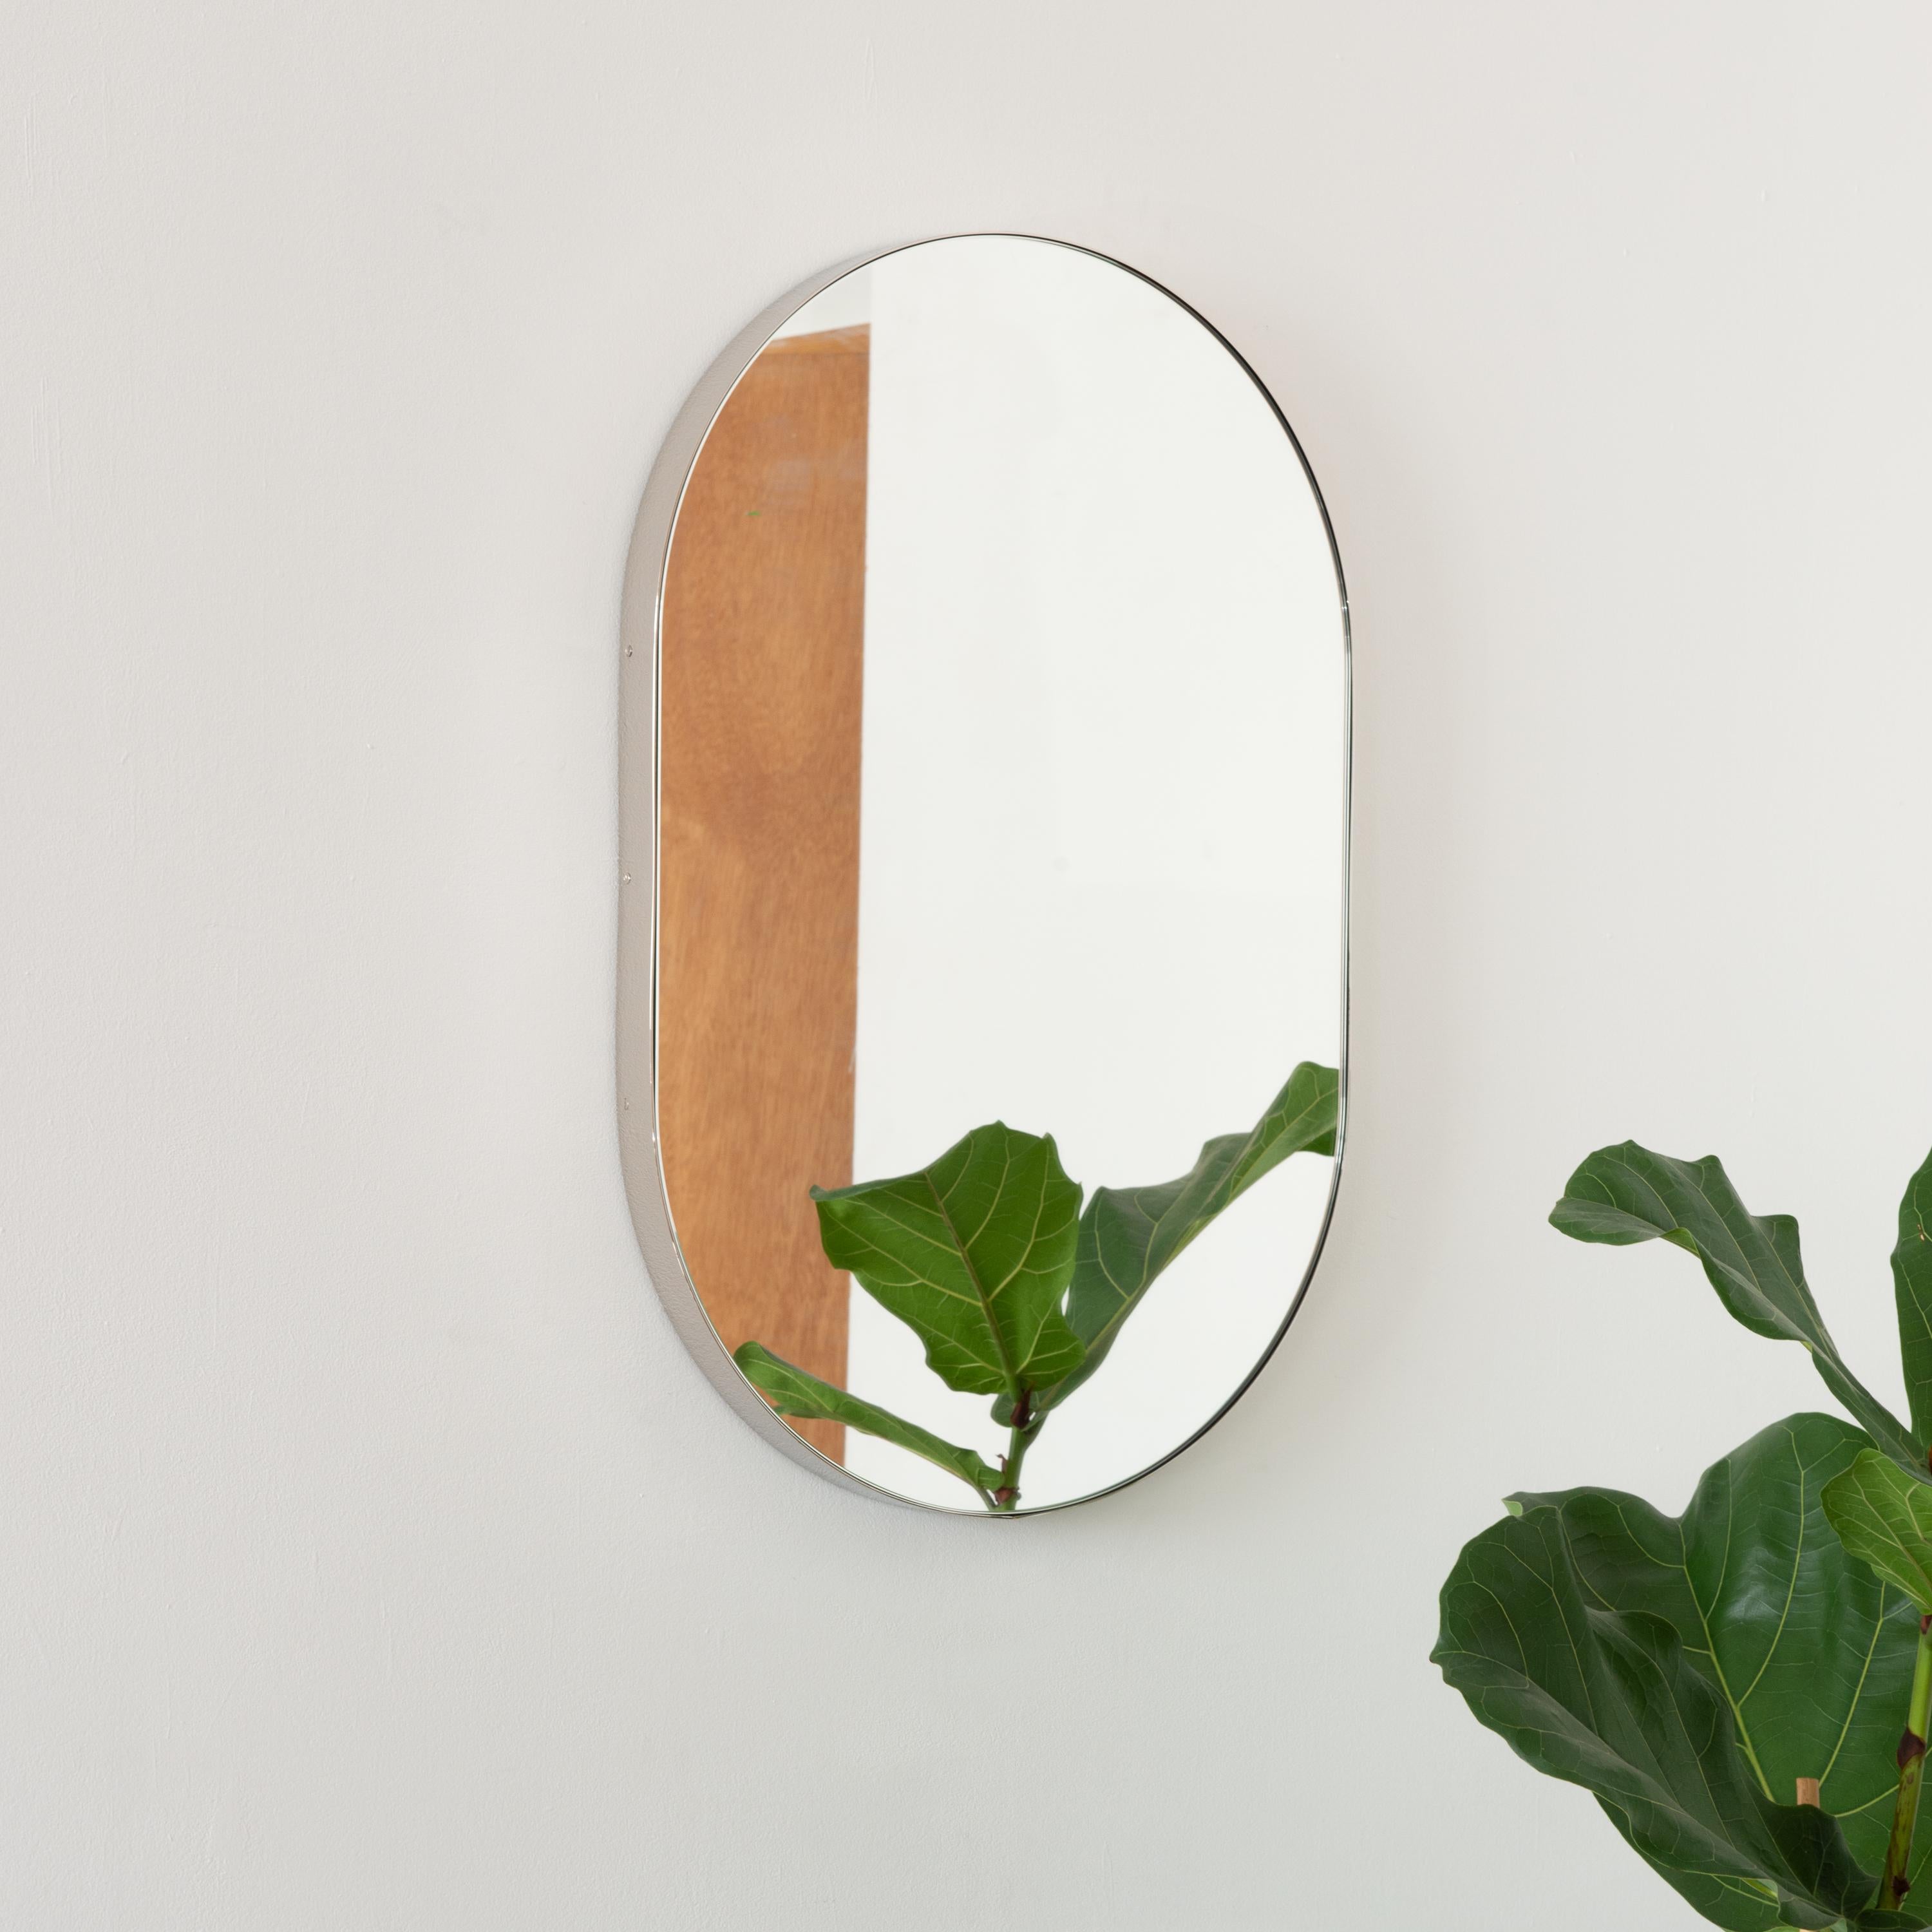 Modern Capsula™ capsule shaped mirror with an elegant nickel plated frame. Designed and handcrafted in London, UK.

Our mirrors are designed with an integrated French cleat (split batten) system that ensures the mirror is securely mounted flush with